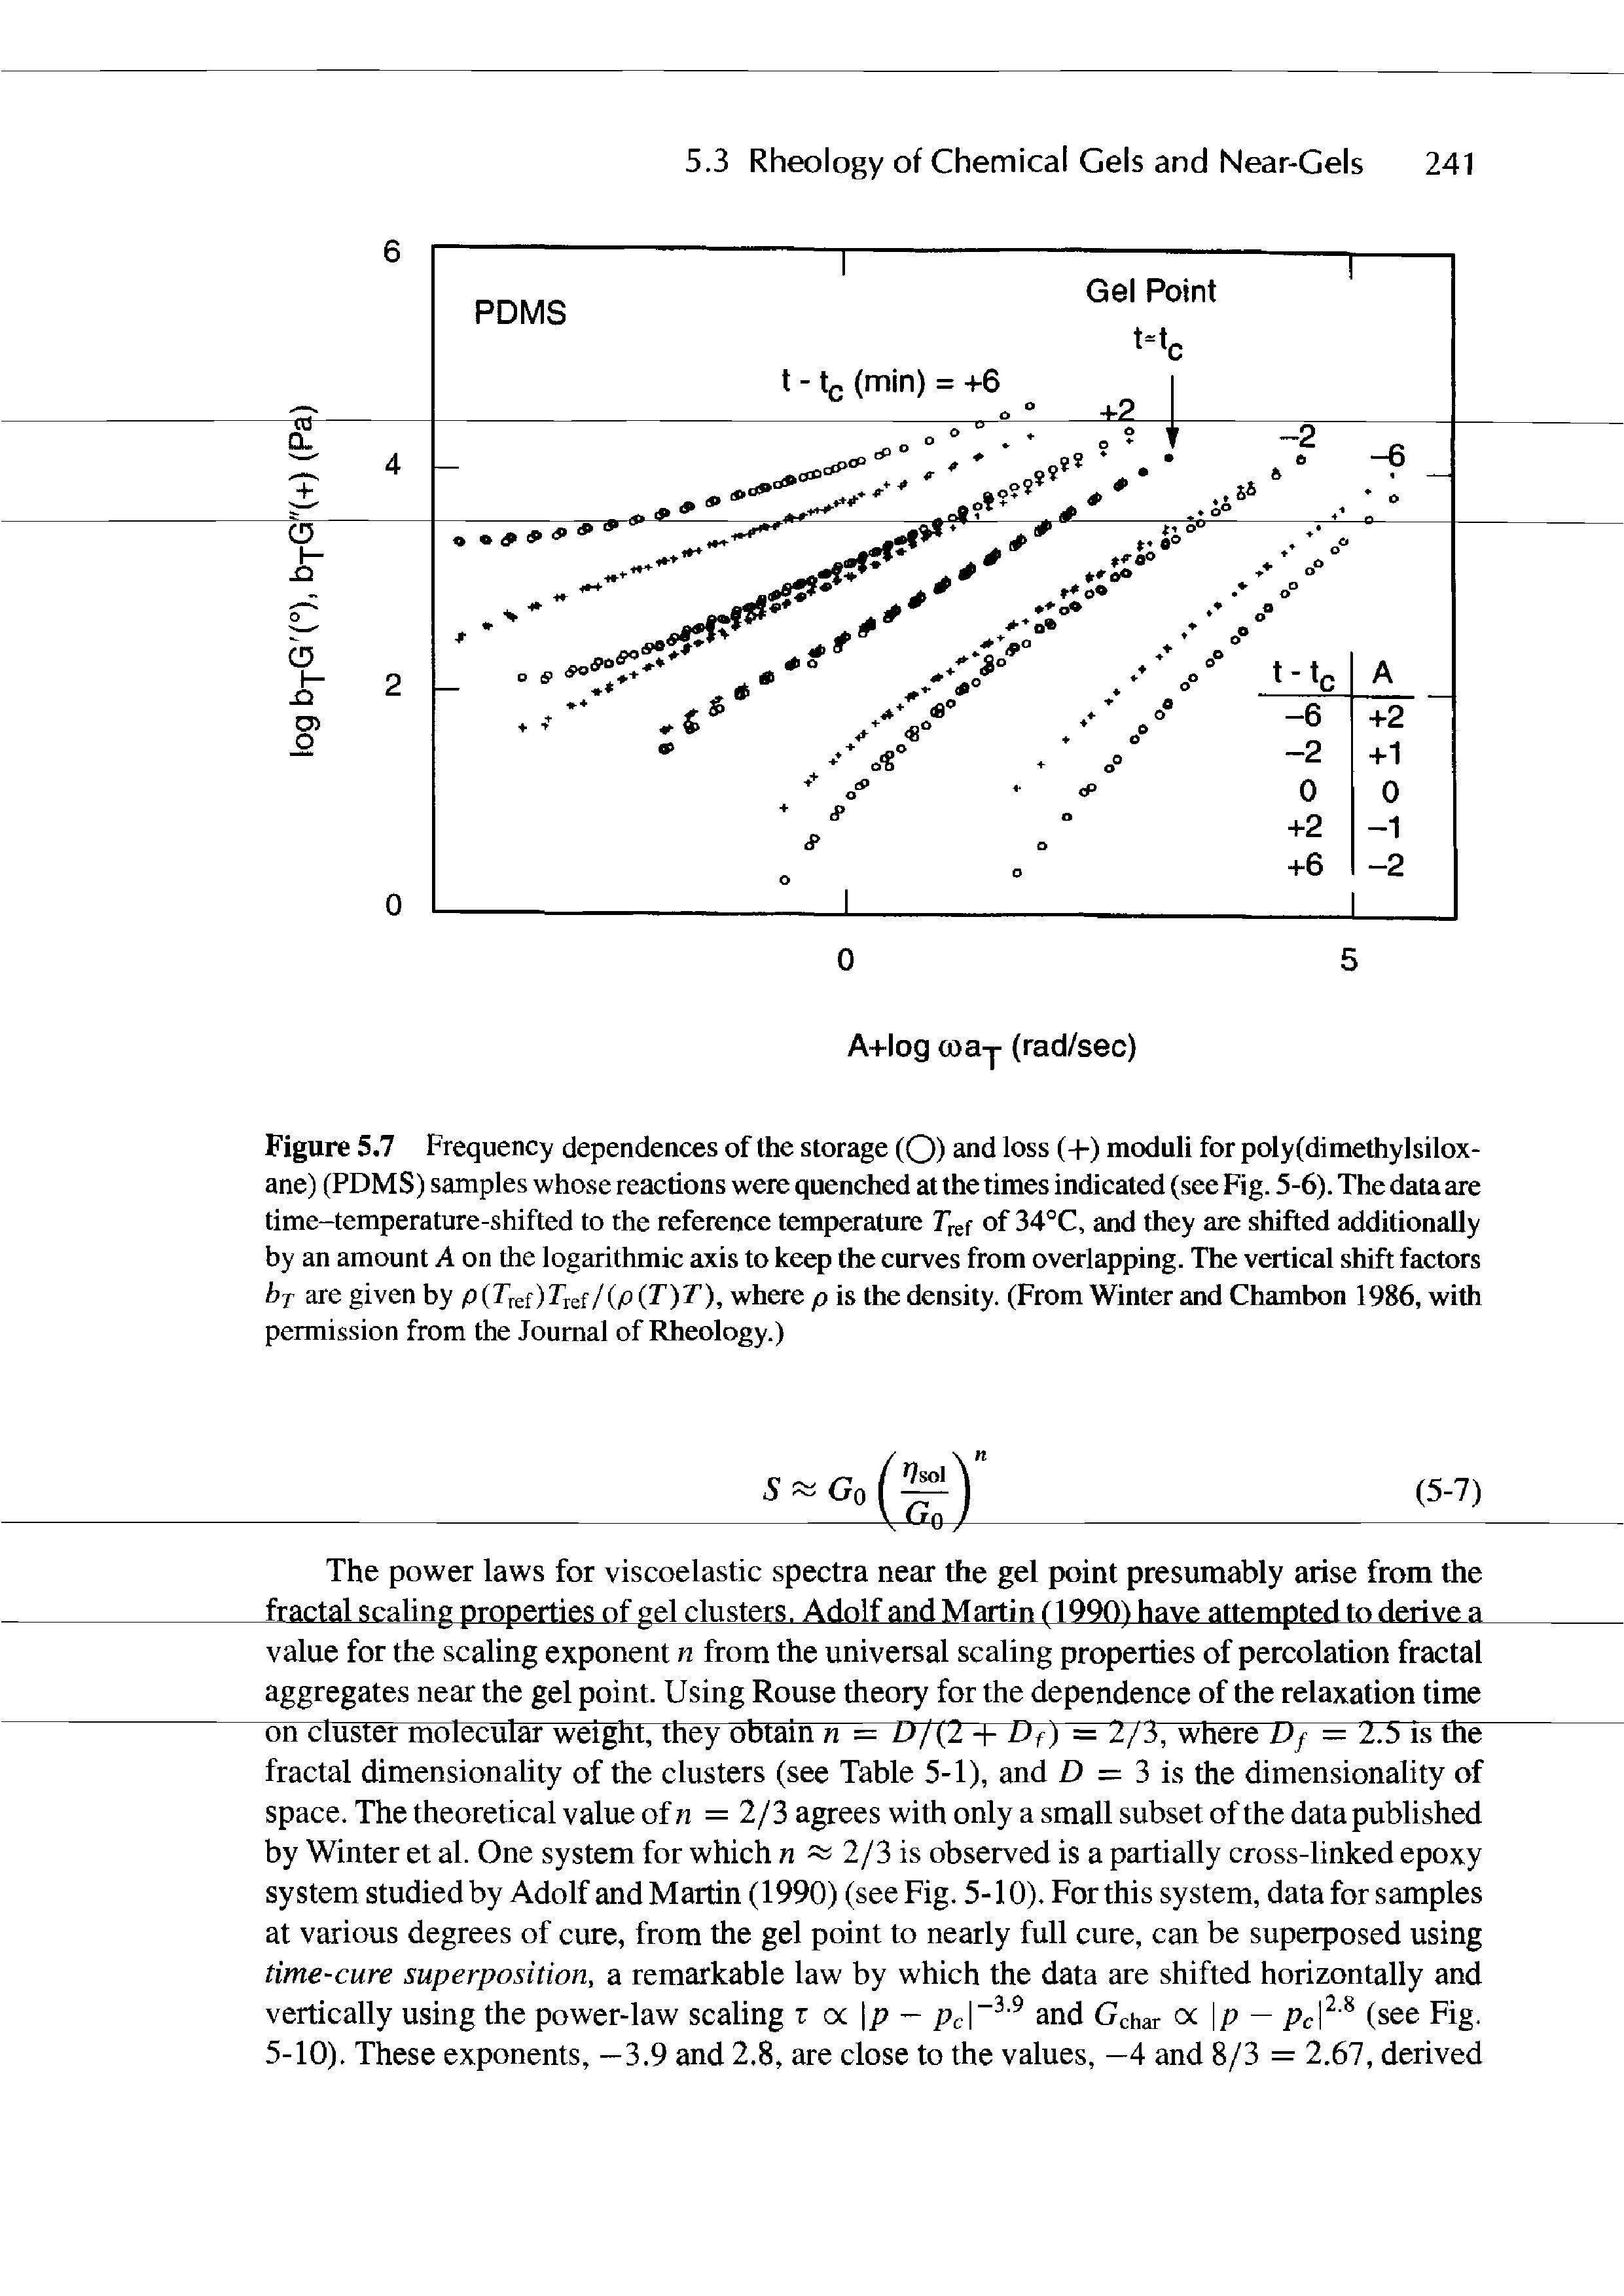 Figure 5.7 Frequency dependences of the storage (Q) and loss (-h) moduli for poly(dimethylsilox-ane) (PDMS) samples whose reactions were quenched at the times indicated (see Fig. 5-6). The data are time-temperature-shifted to the reference temperature T gf of 34°C, and they are shifted additionally by an amount A on the logarithmic axis to keep the curves from overlapping. The vertical shift factors bf are given by p T sf)T d/ p T)T), where p is the density. (From Winter and Chambon 1986, with permission from the Journal of Rheology.)...